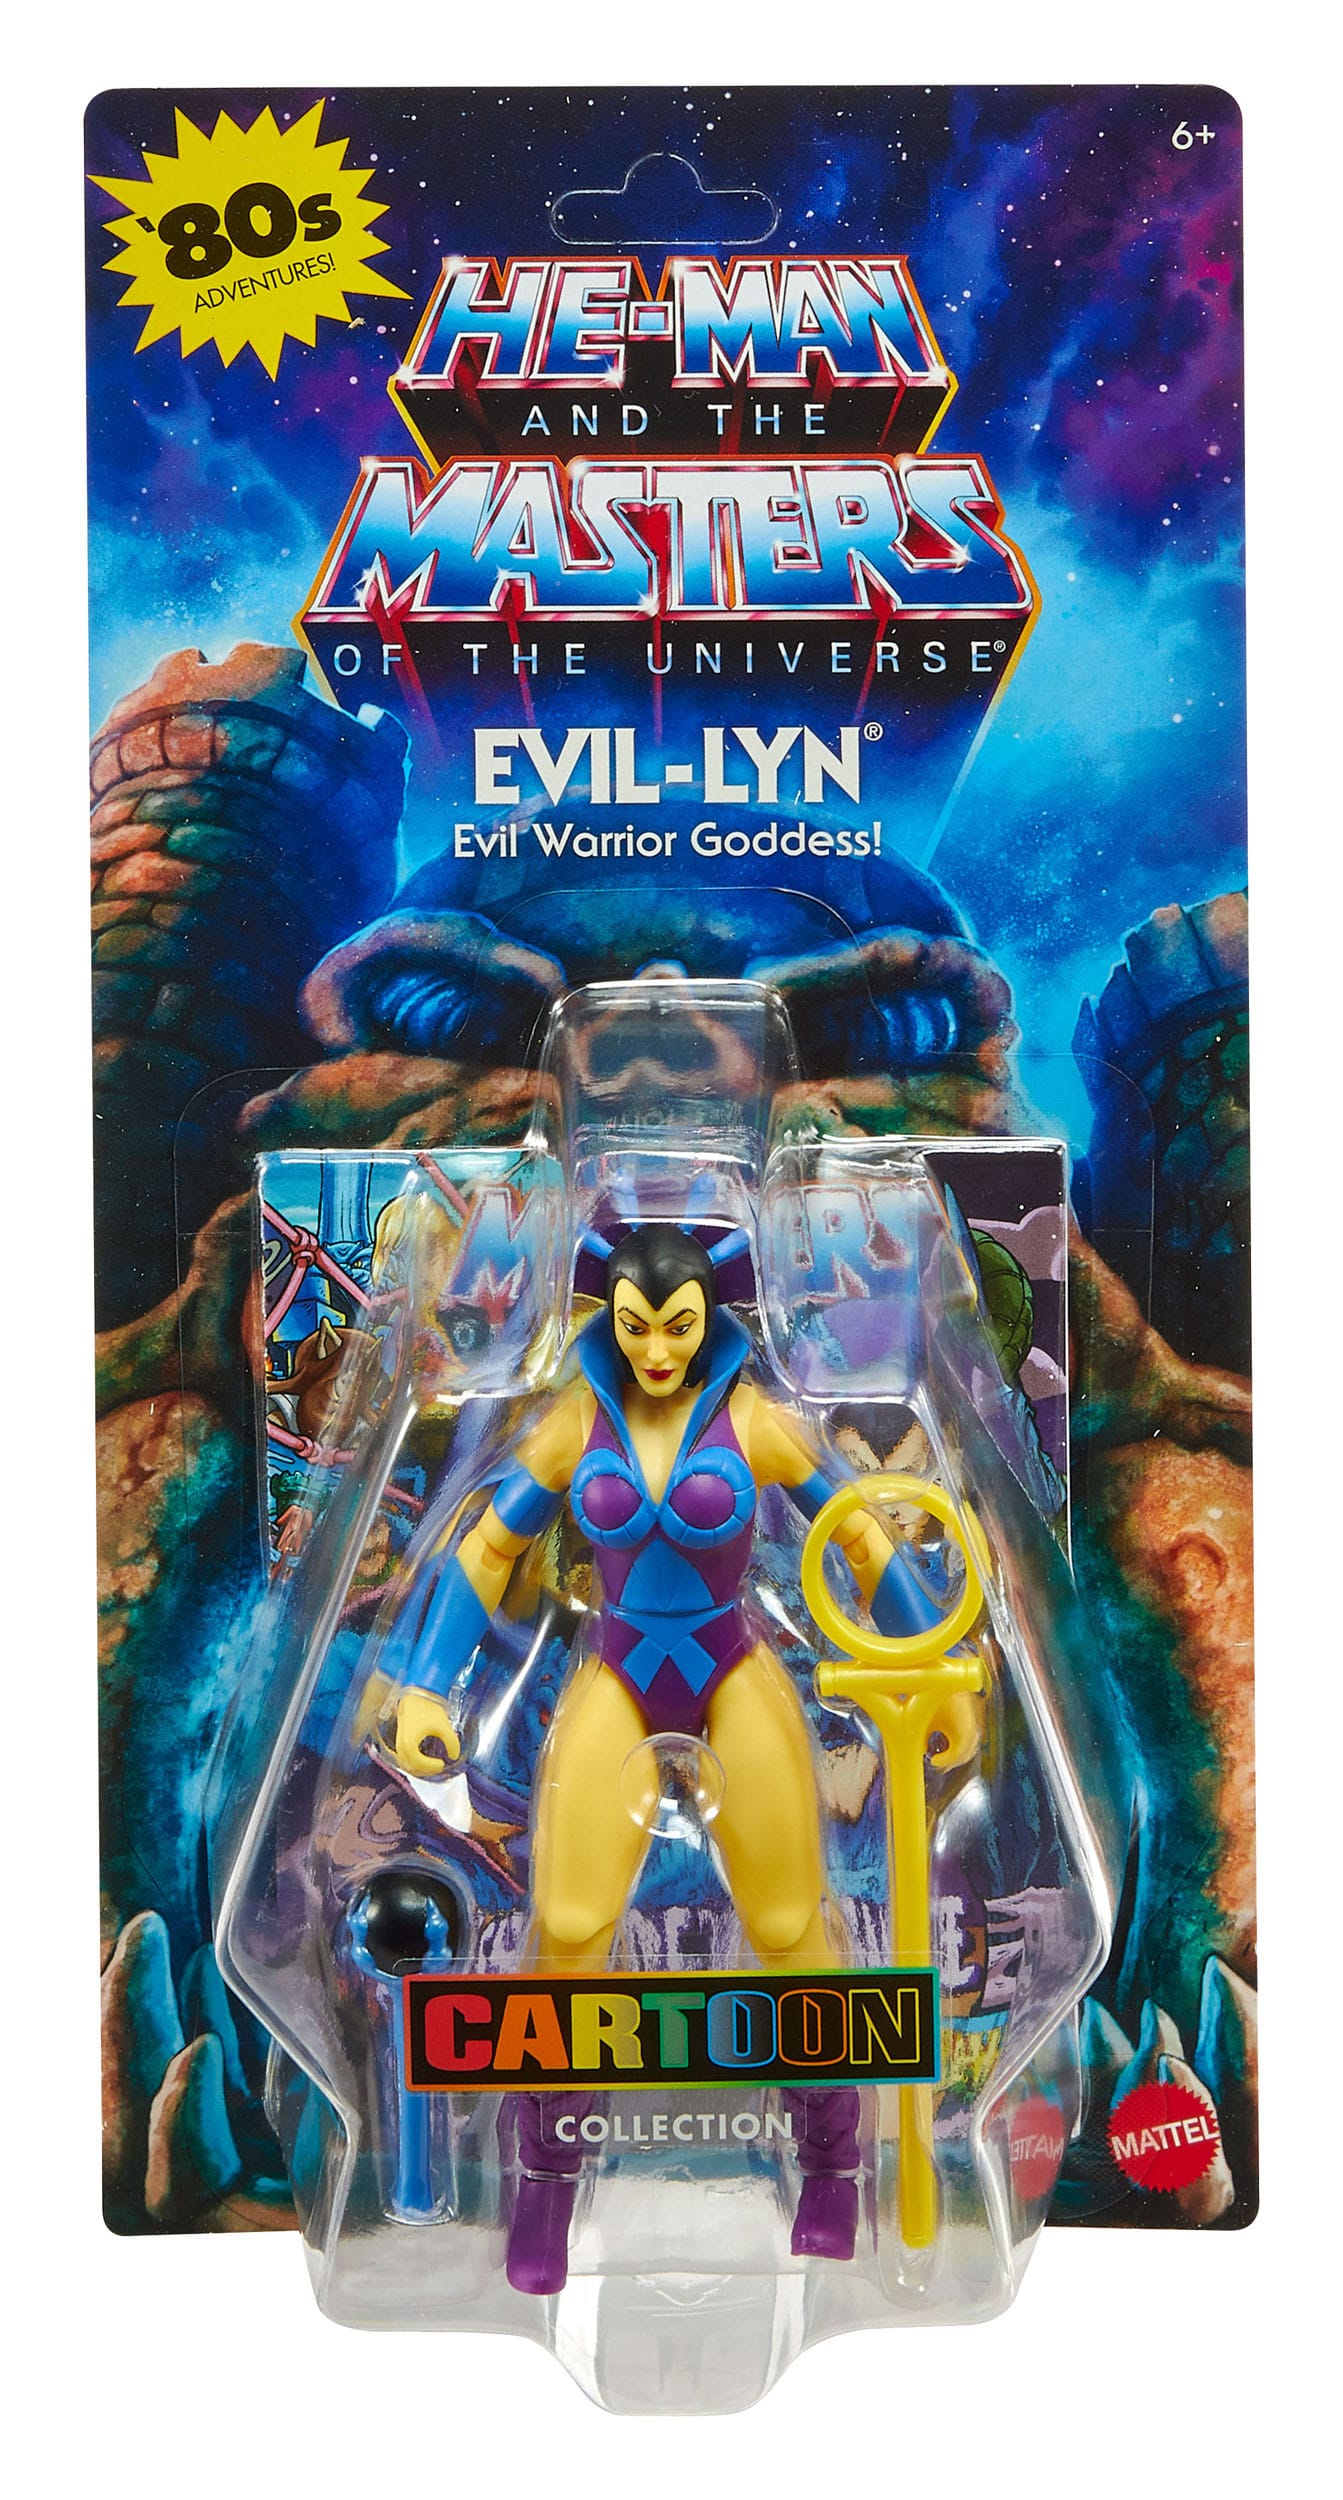 Masters of the Universe Origins Actionfigur Cartoon Collection: Evil-Lyn 14 cm MATTHYD35 194735244157